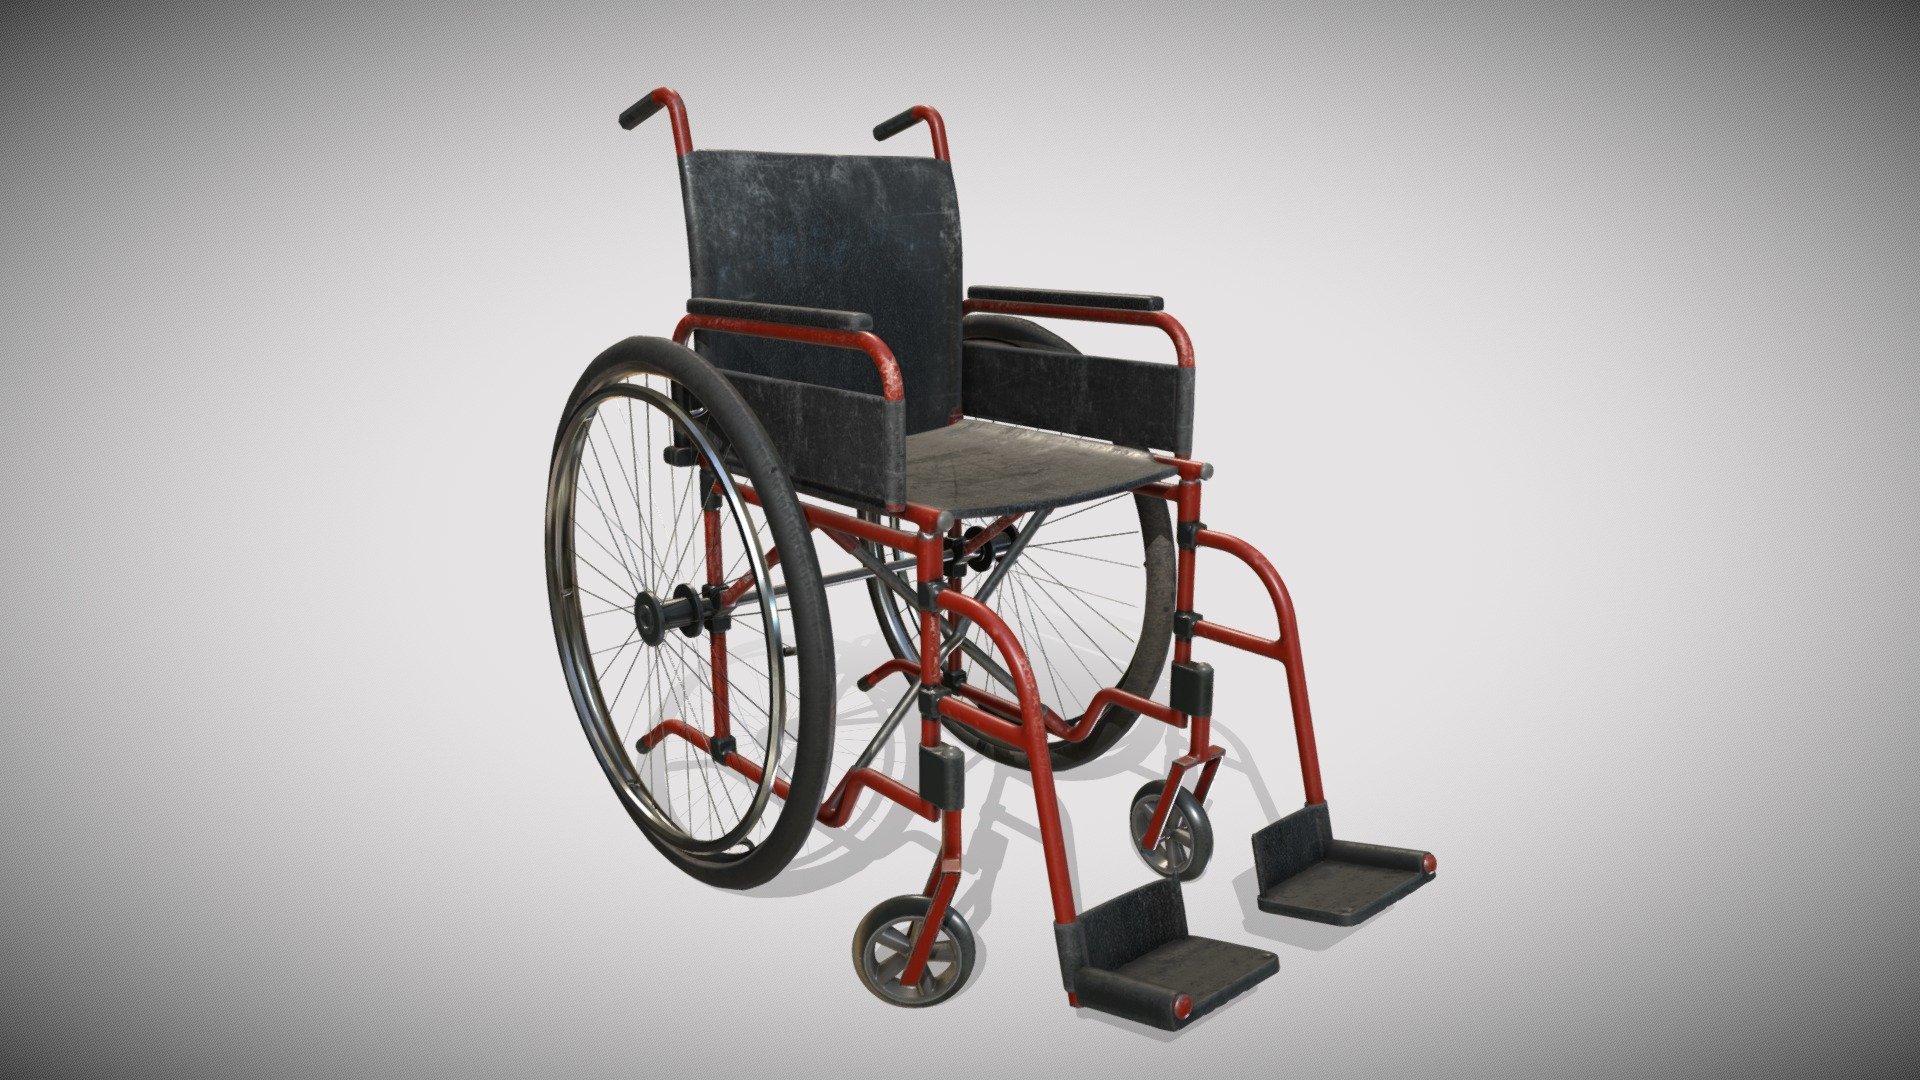 All in One Map 4k
The nice original CAD Model is from Nibesh kumar modak:
https://grabcad.com/library/wheel-chair-14 - Wheel Chair - Download Free 3D model by Francesco Coldesina (@topfrank2013) 3d model